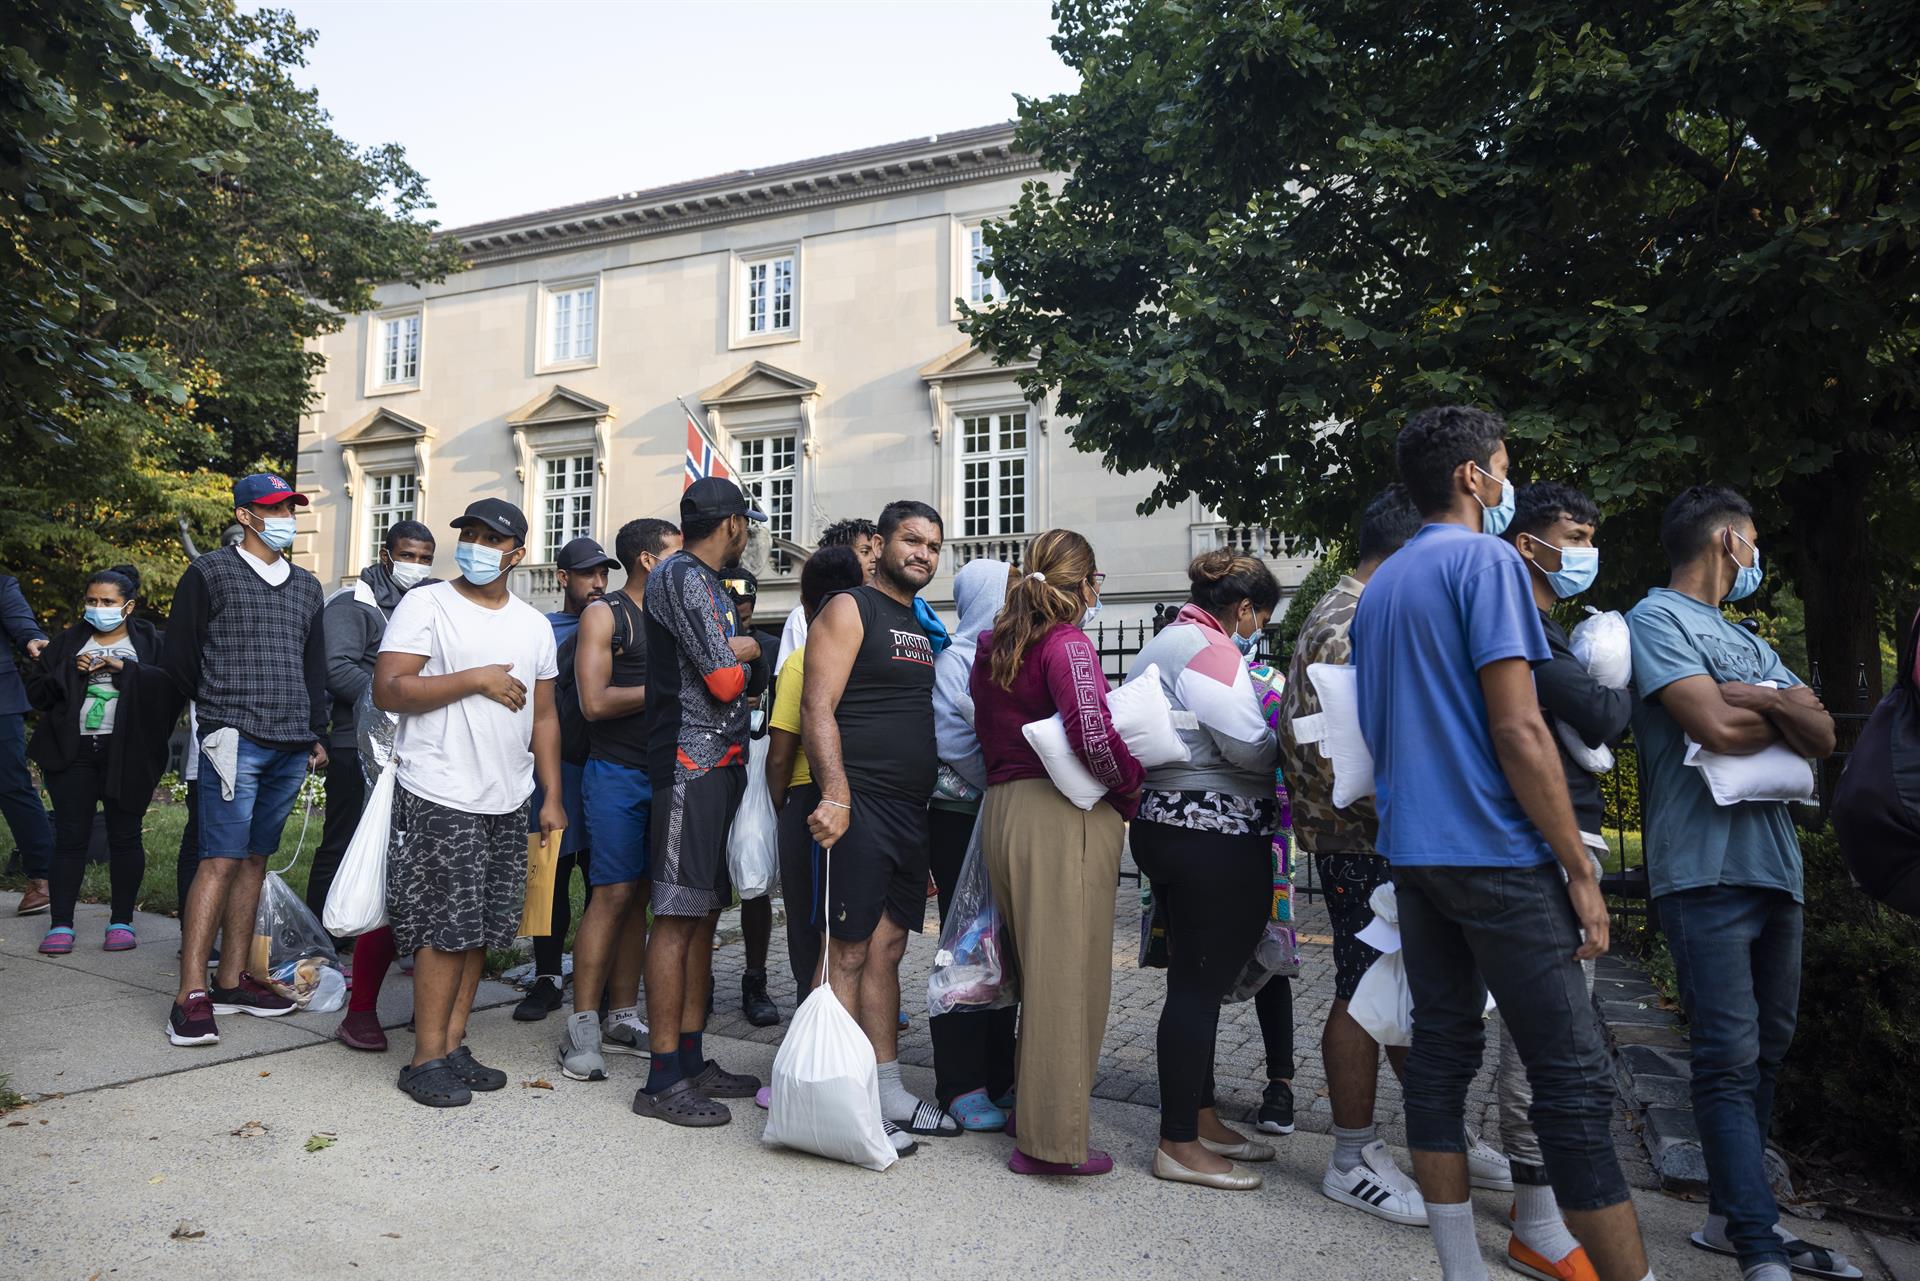 Two bus-loads of migrants from Central and South America arrive outside Vice President Kamala Harris’s residence at the Naval Observatory early in the morning in Washington, DC, USA, 15 September 2022. EPA-EFE/JIM LO SCALZO
